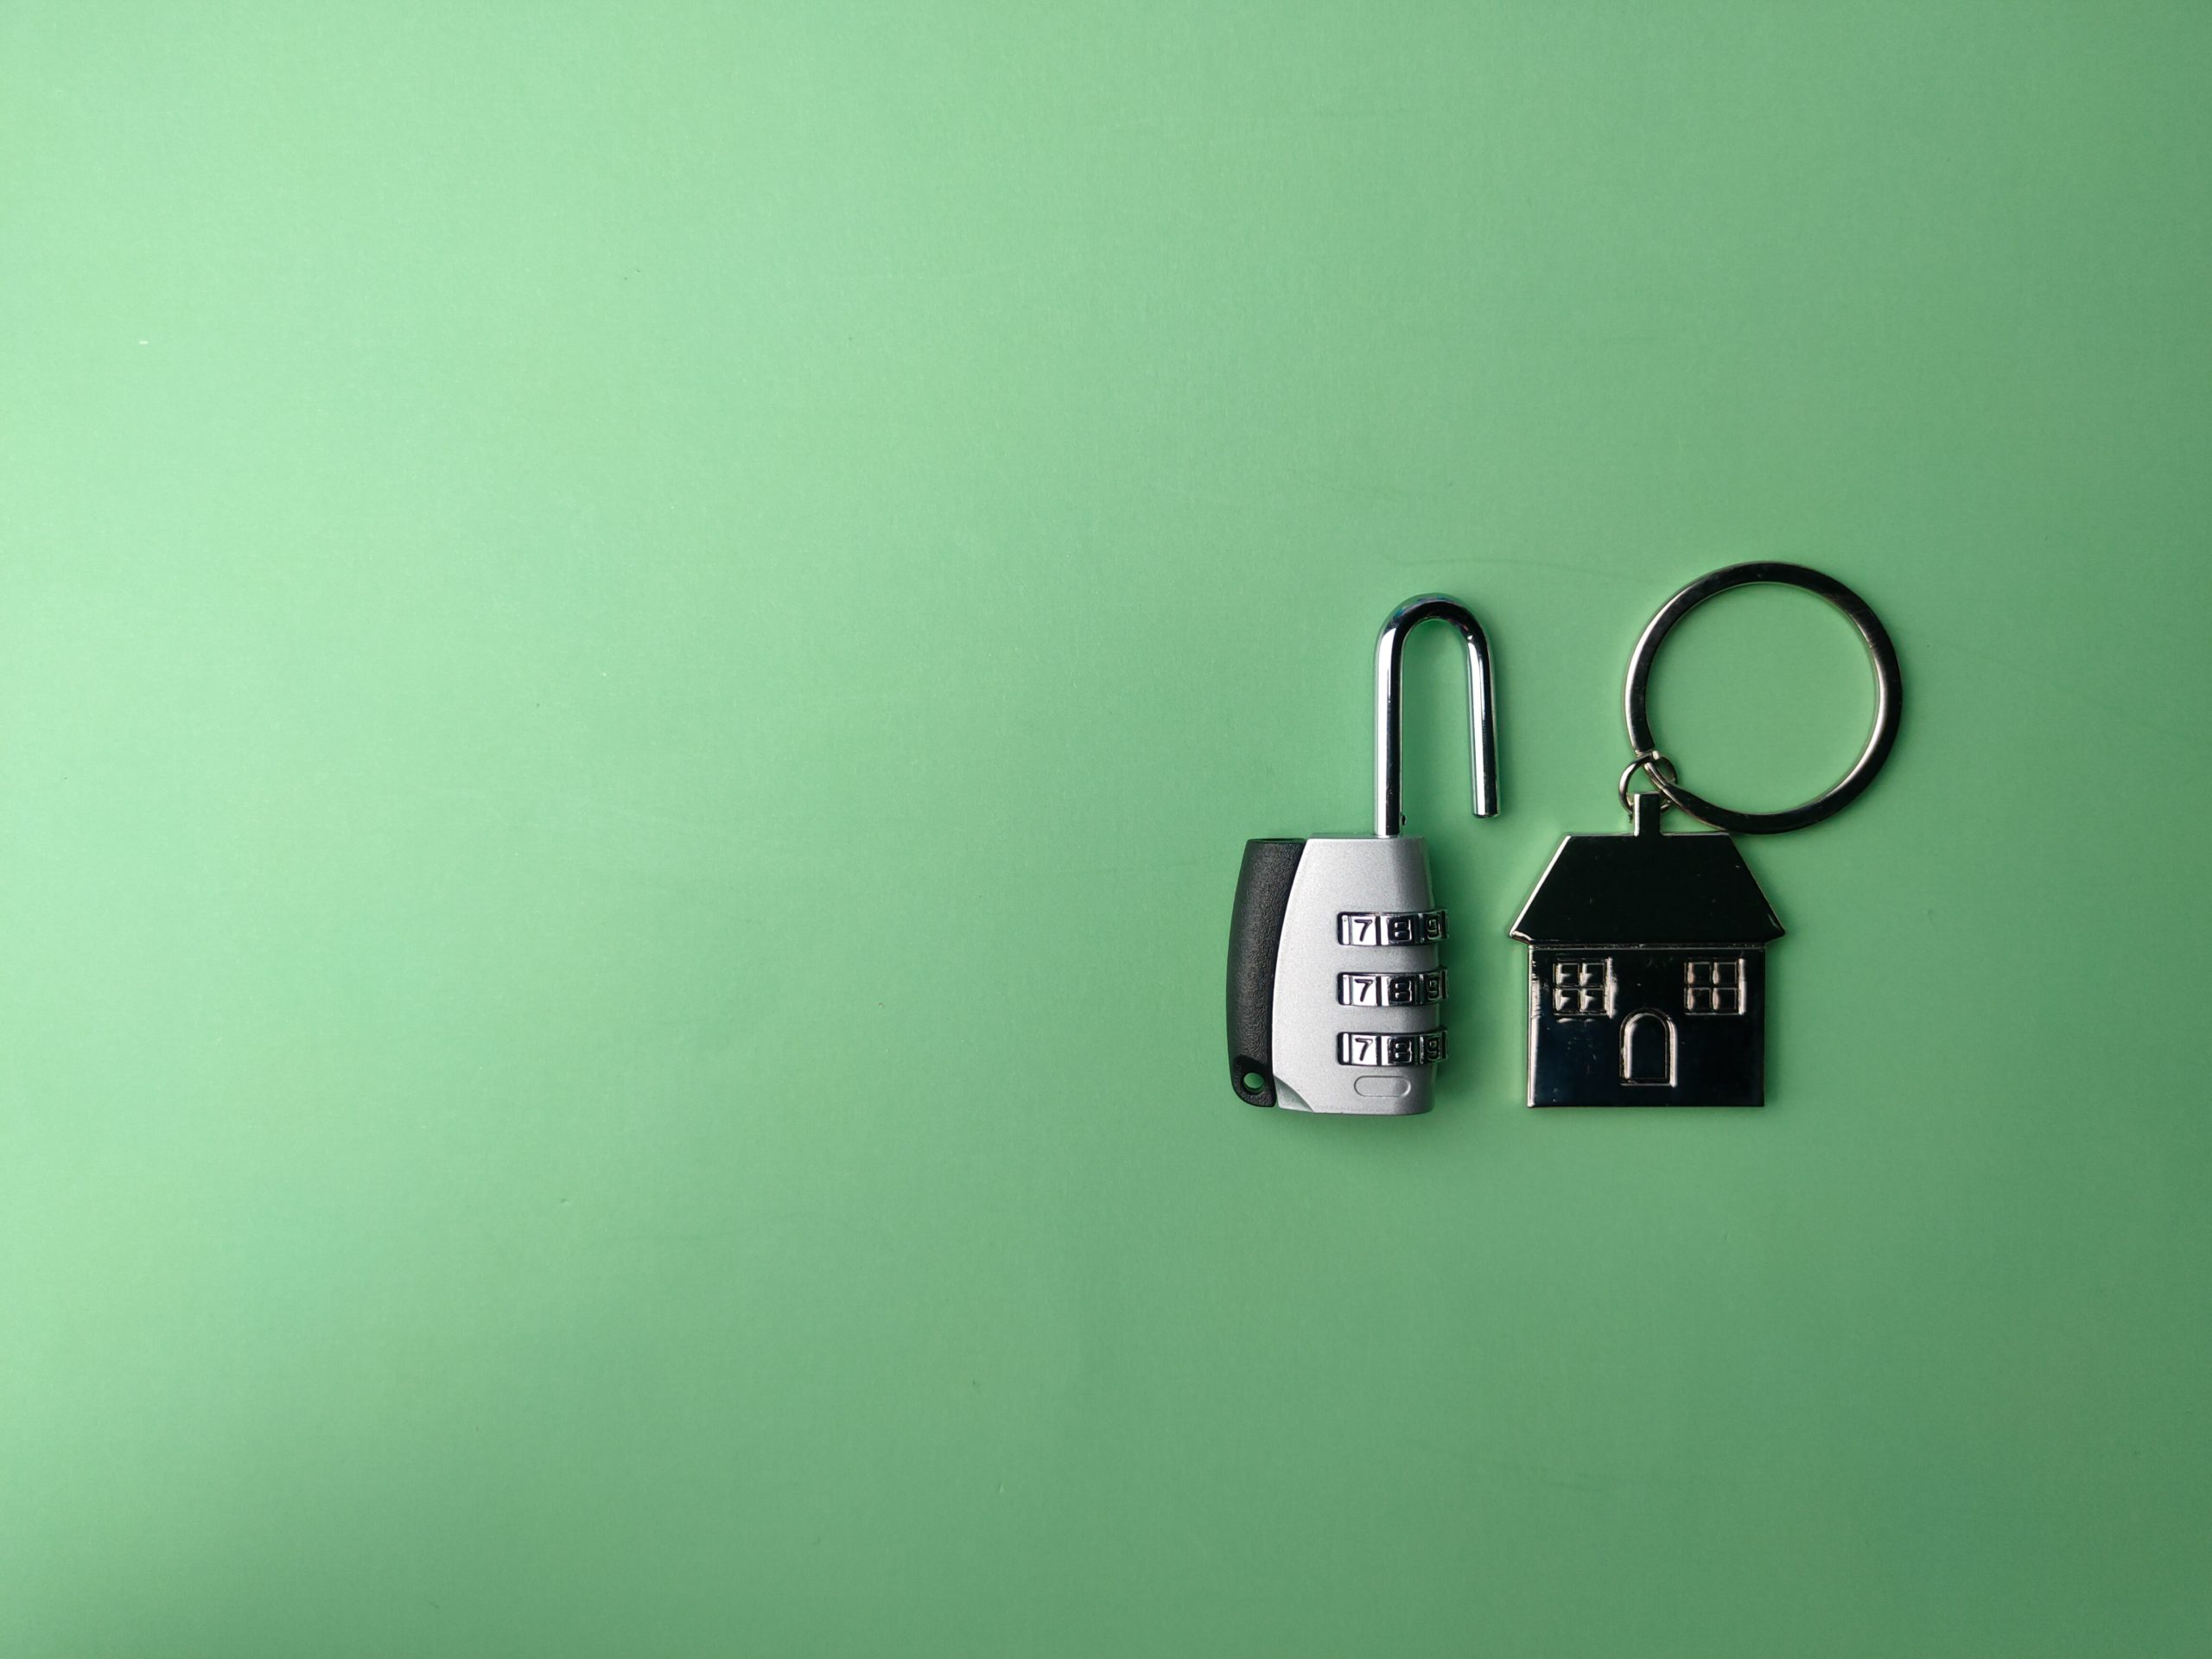 a metal keychain of a house with an opened lock next to it on a light green background